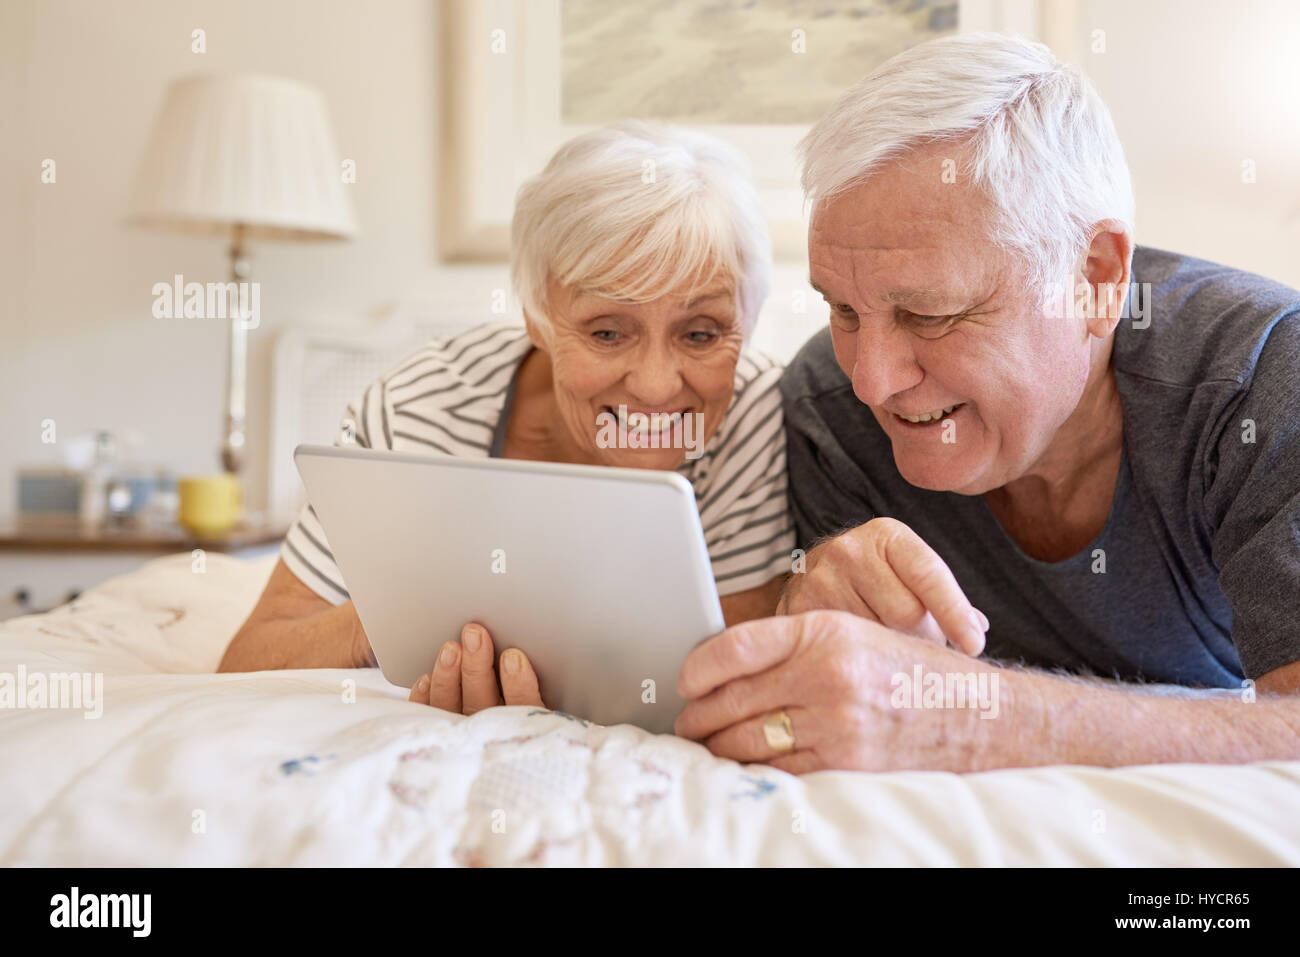 Smiling senior couple using a digital tablet together in bed Stock Photo